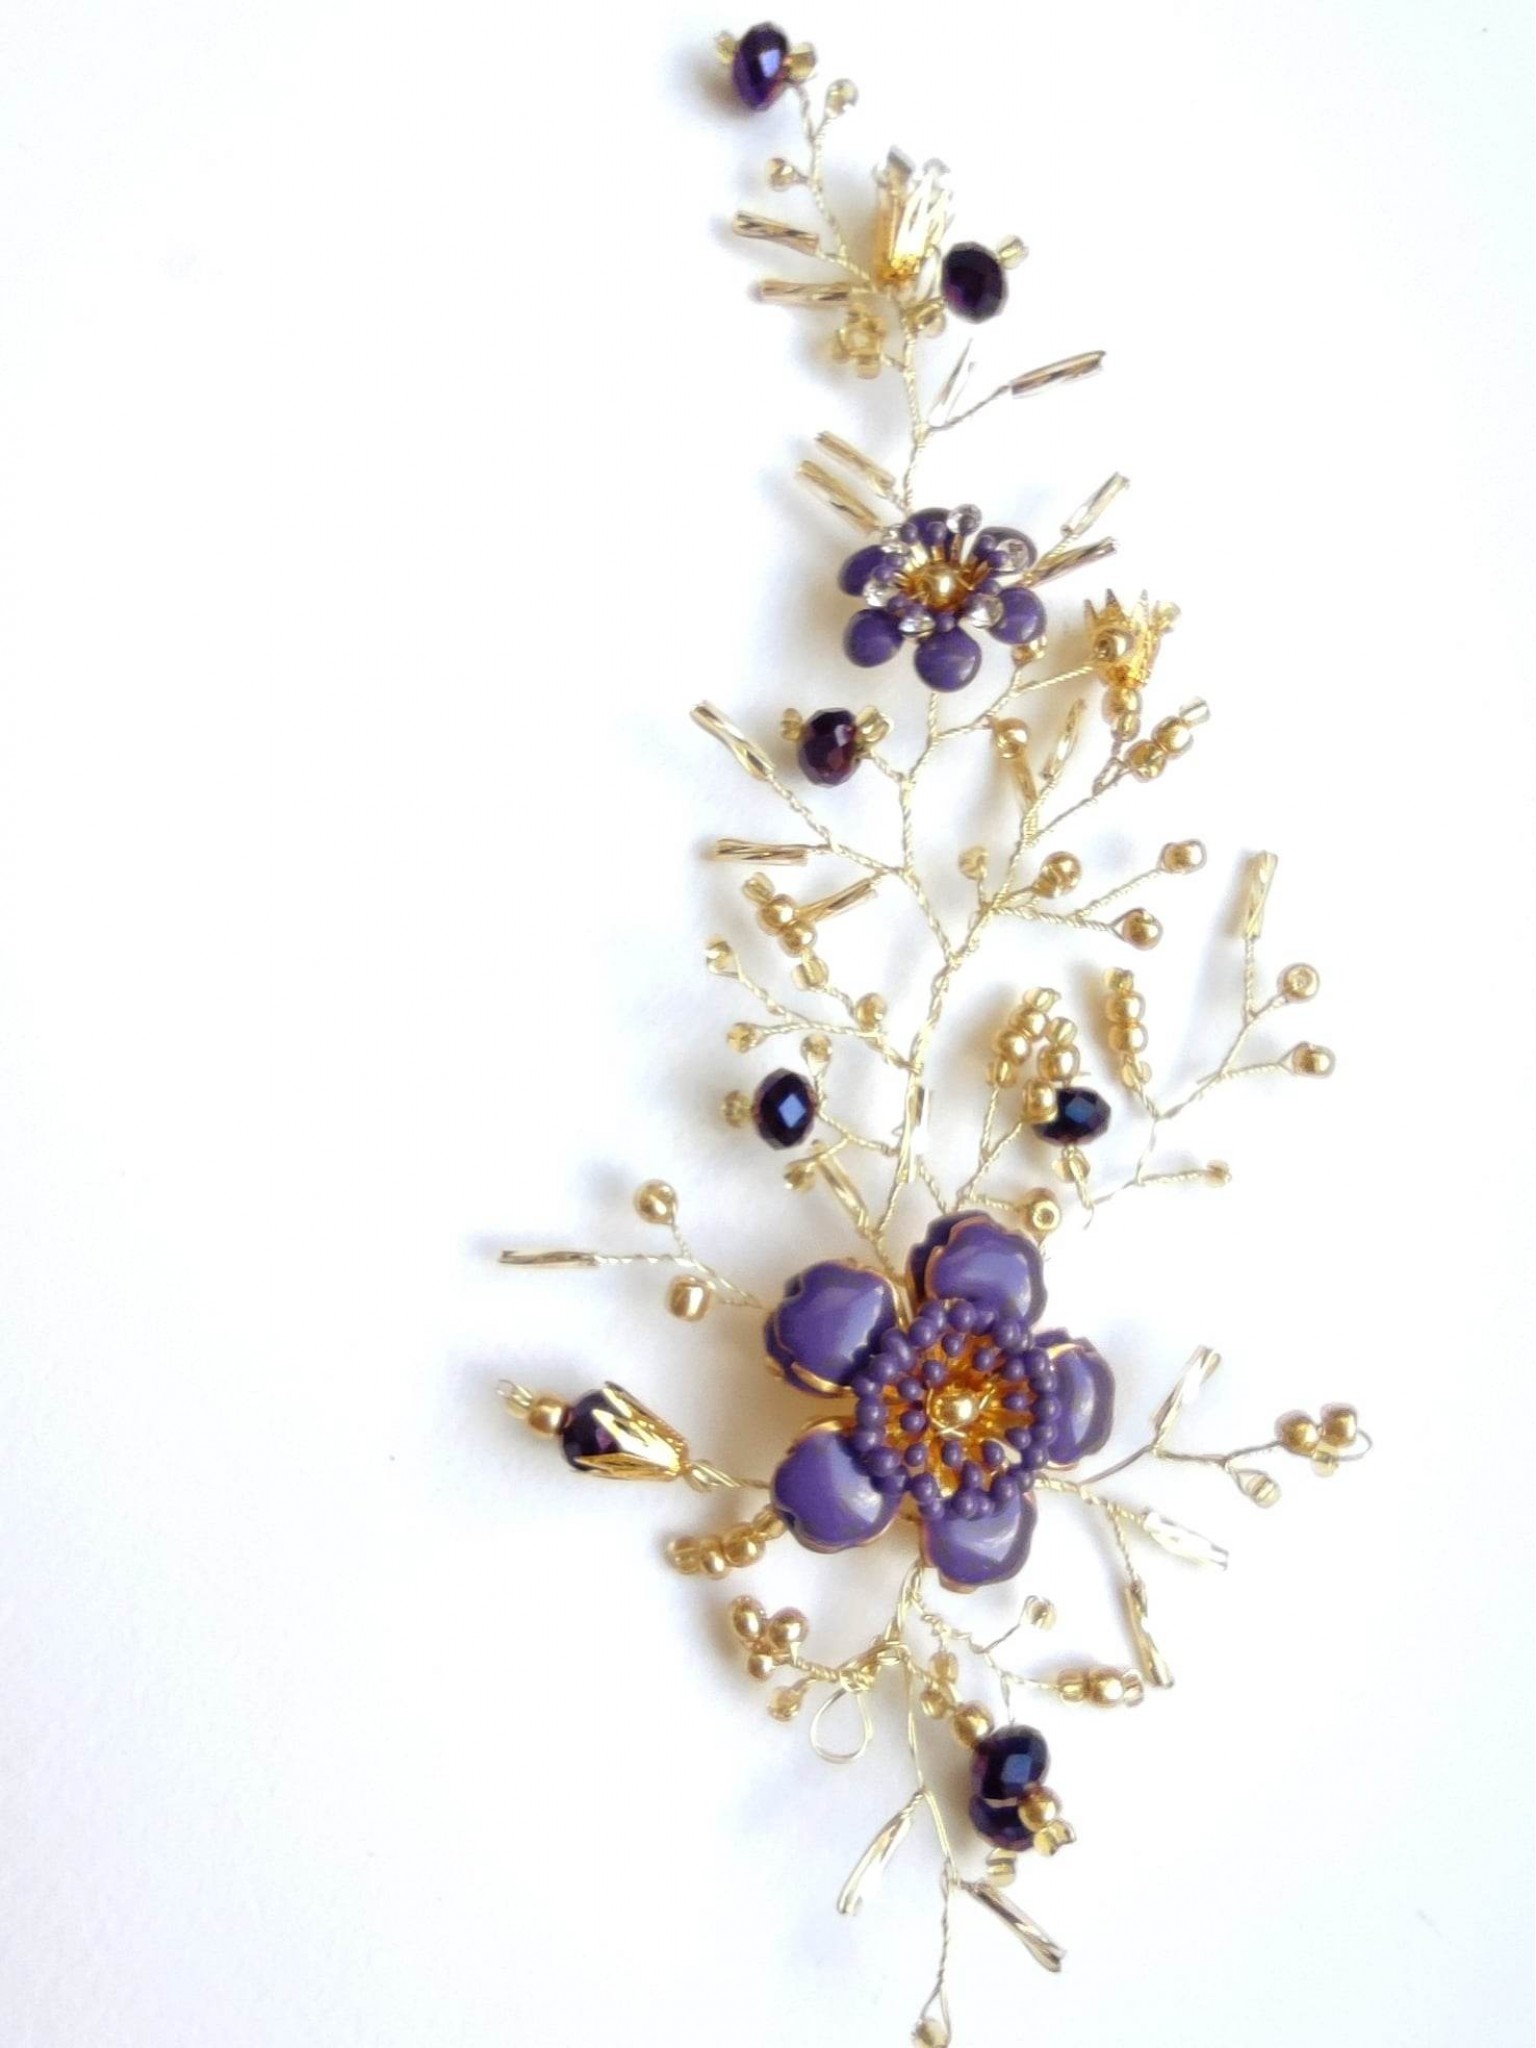 Lovely Crystal Hair Accessory in Light Purple and Gold Colors - Purple Fantasy